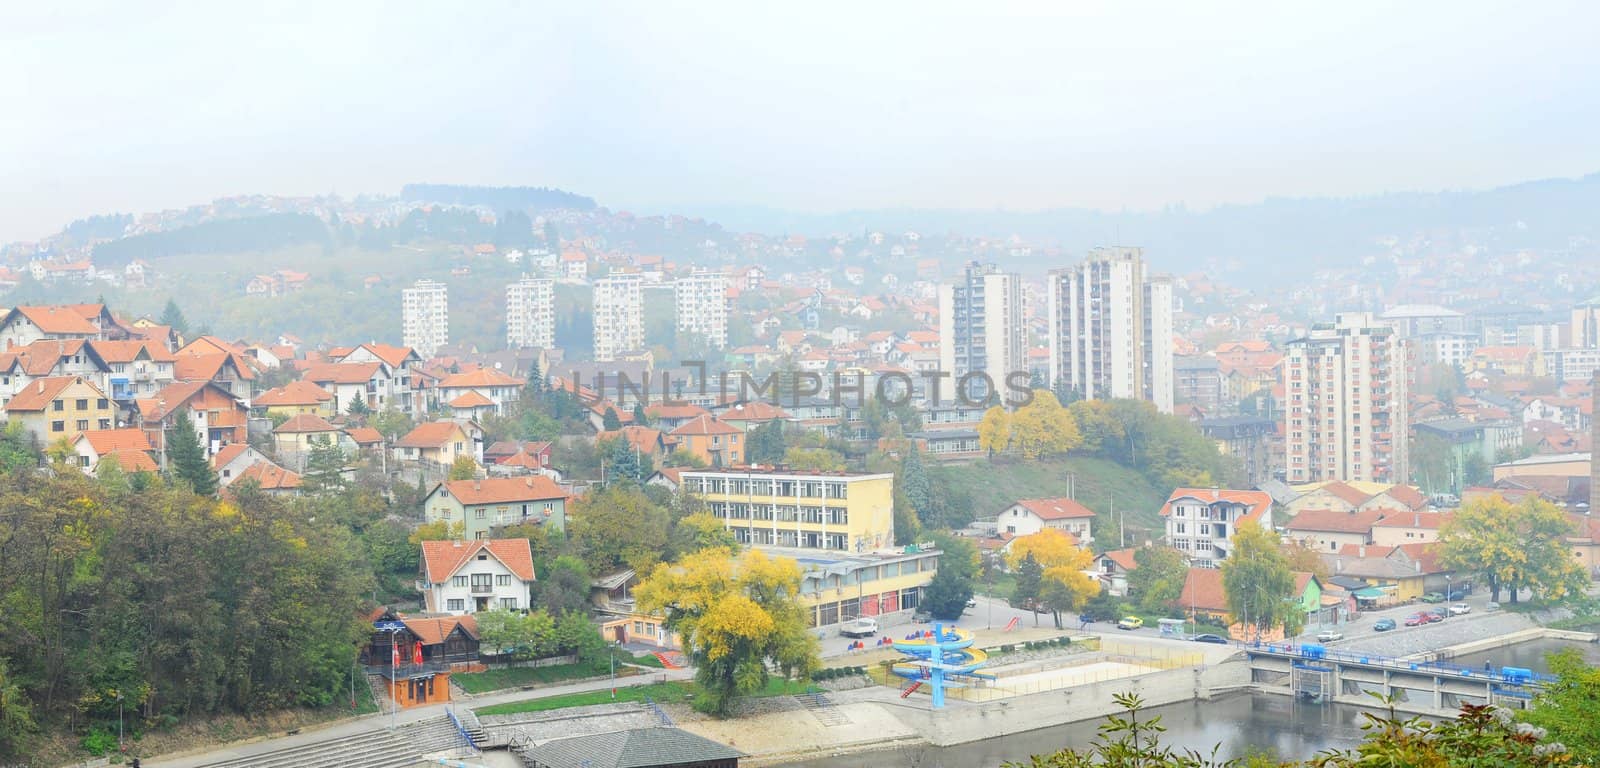 Uzice  is a city and municipality in western Serbia, located at the banks of the Detinja river.